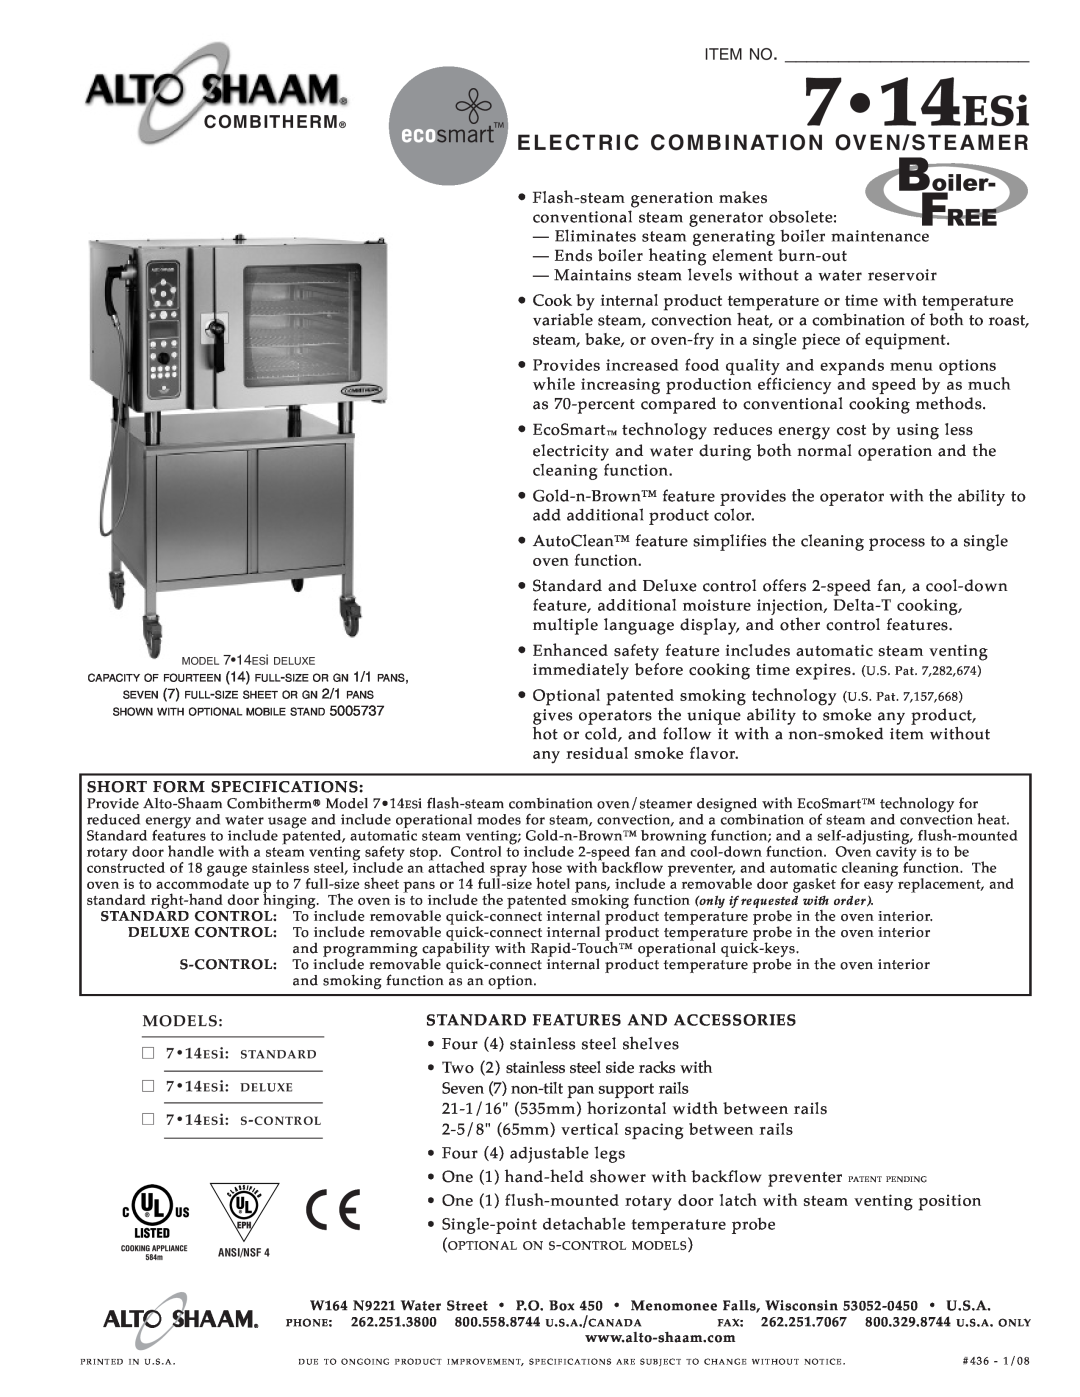 Alto-Shaam 7-14ESi specifications 7 14 ESi, Item No, Elect Ric, Combina Tion Oven/S Teame R, Combitherm 